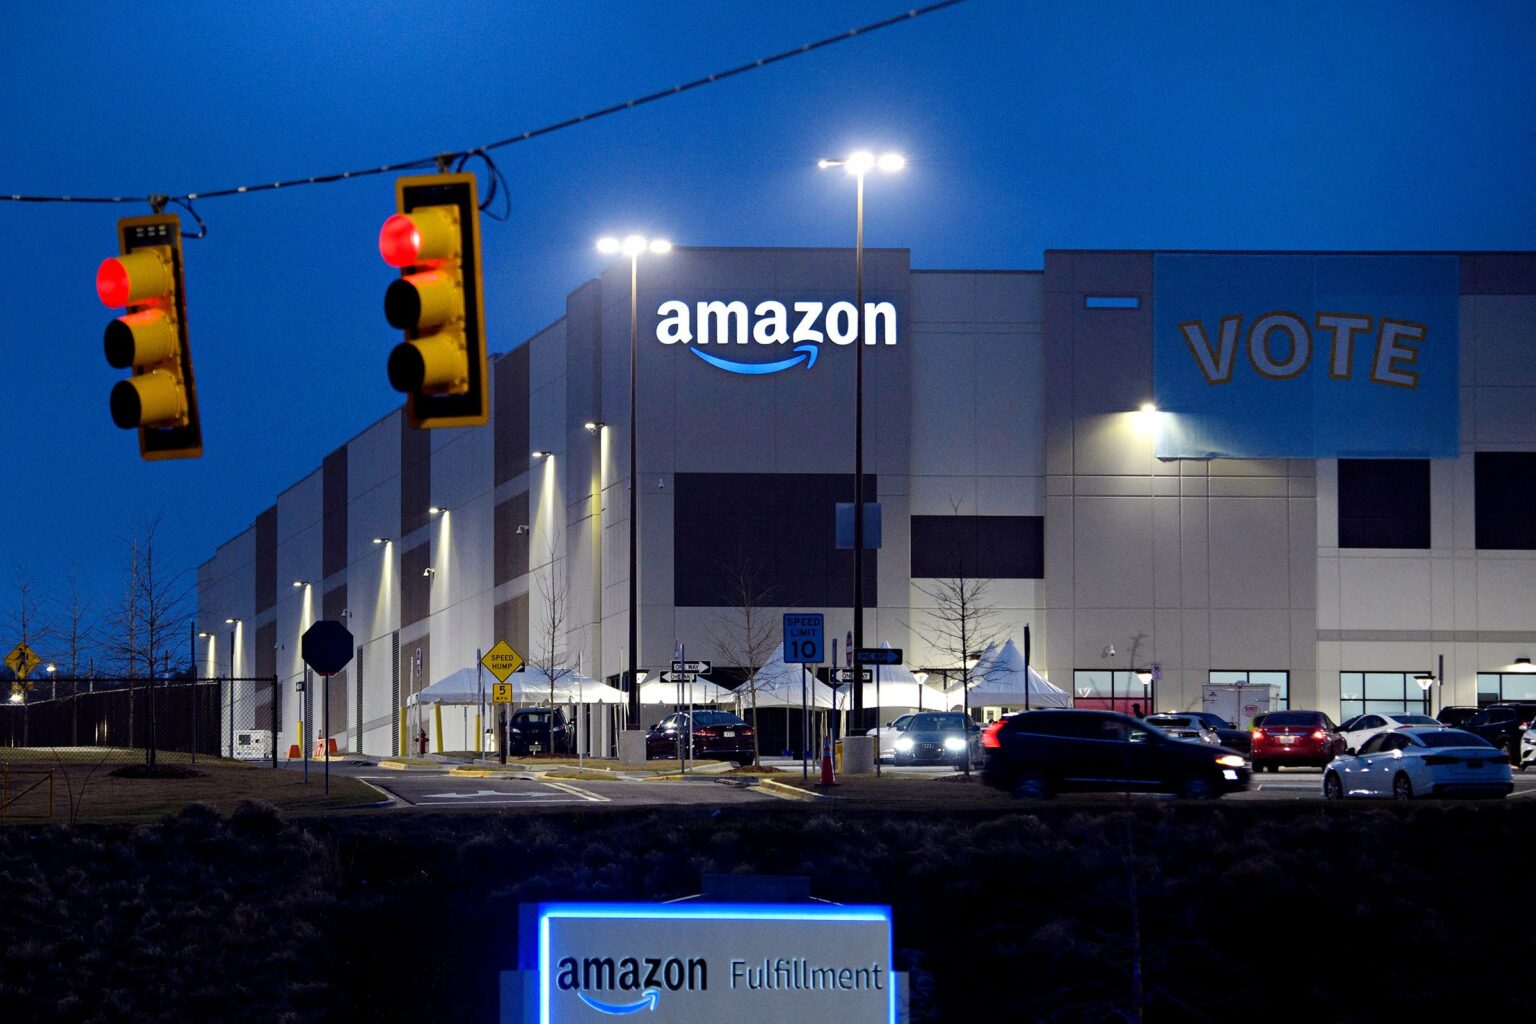 A Vote banner hangs at an Amazon fulfillment center early on March 27, 2021 in Bessemer, Alabama. - Amazon Alabama workers are trying to unionize with the Retail, Wholesale and Department Store Union (RWDSU) in Birmingham, as clashes intensified between lawmakers and the e-commerce giant ahead of a deadline for a vote that could lead to the first union on US soil at the massive tech company. The visit marks the latest high-profile appearance in the contentious organizing effort for some 5,800 employees at Amazon's warehouse in Bessemer which culminates next week.
Credit:  PATRICK T. FALLON/AFP/Getty Images